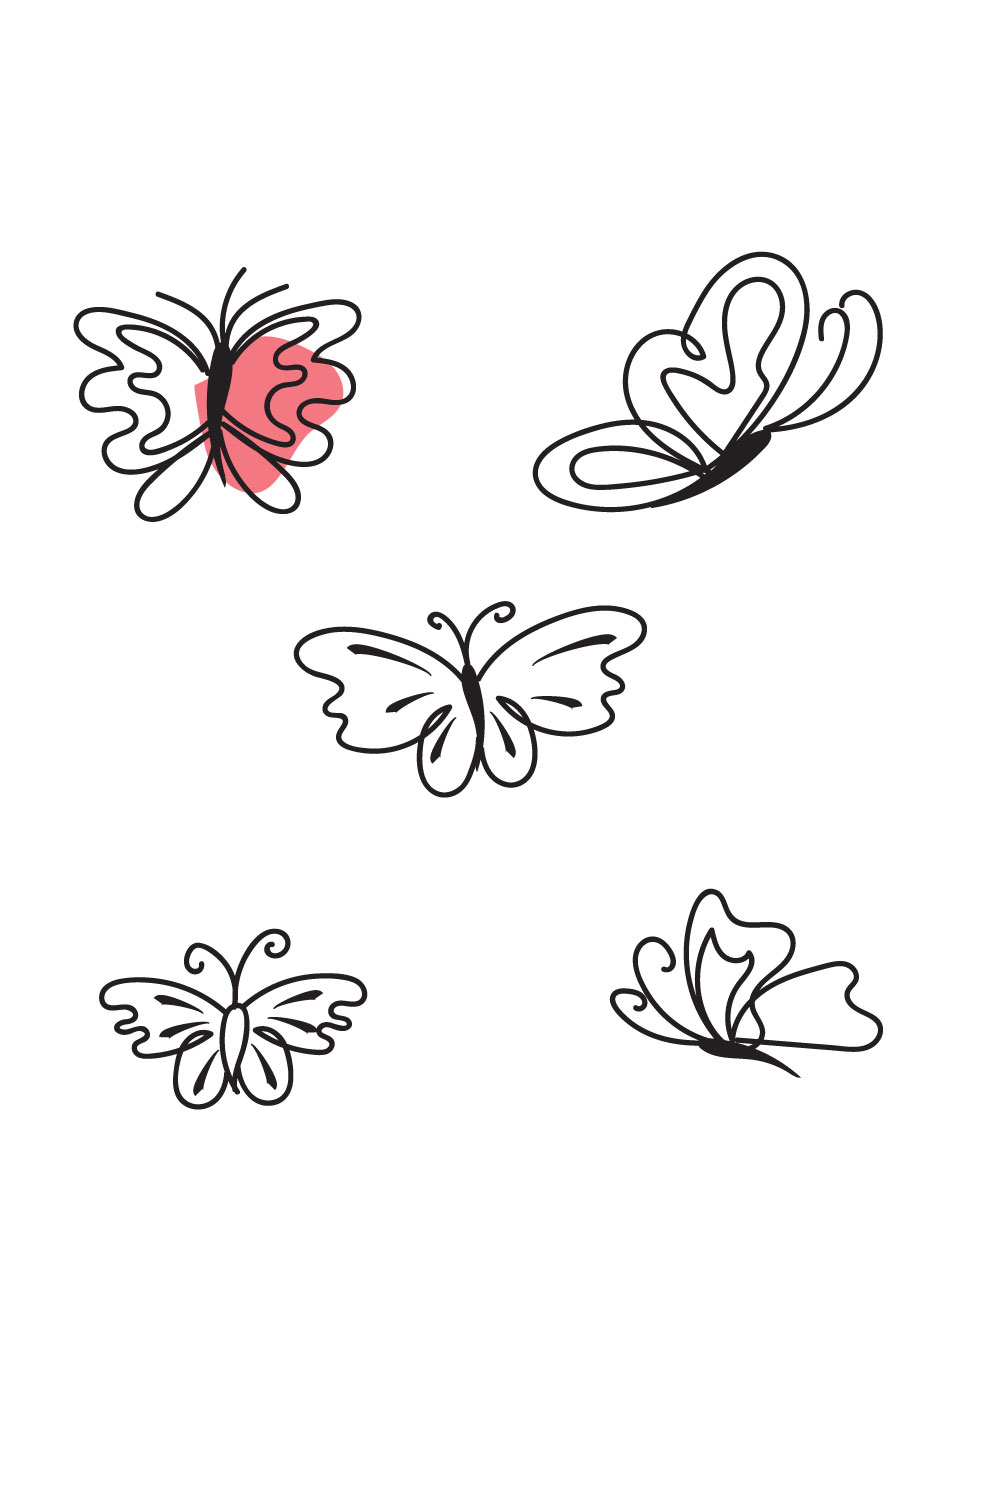 Drawing of three butterflies flying in the air.